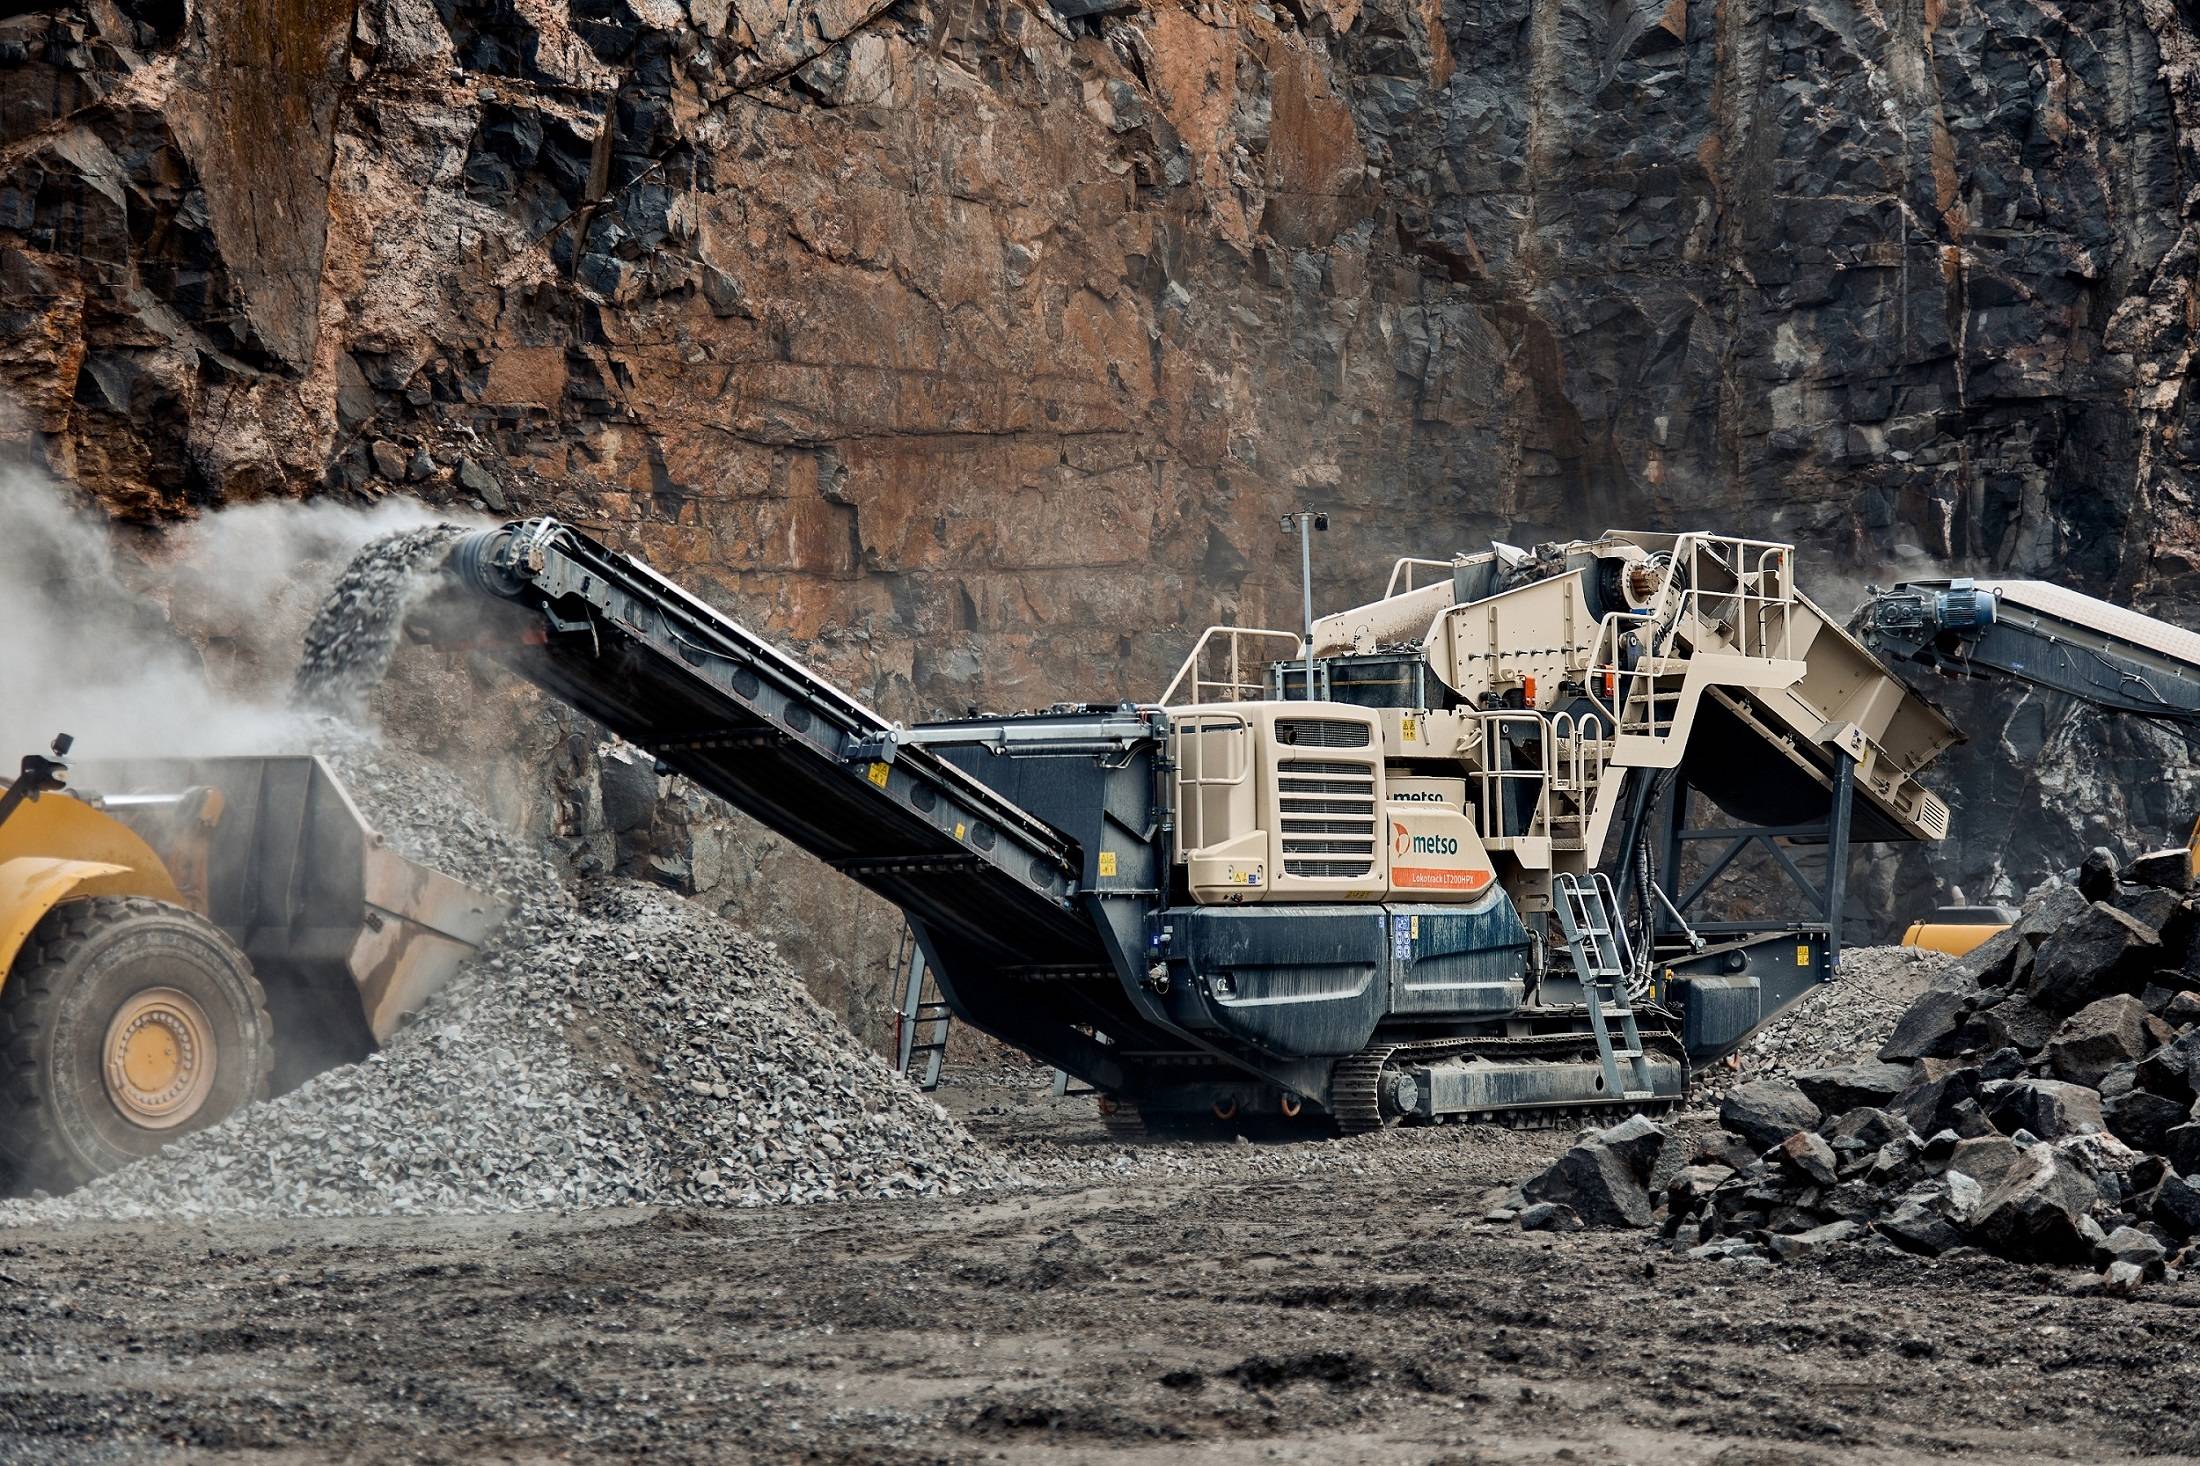 Palmero will represent Metso Outotec’s complete aggregates portfolio, including the well-known Lokotrack series.